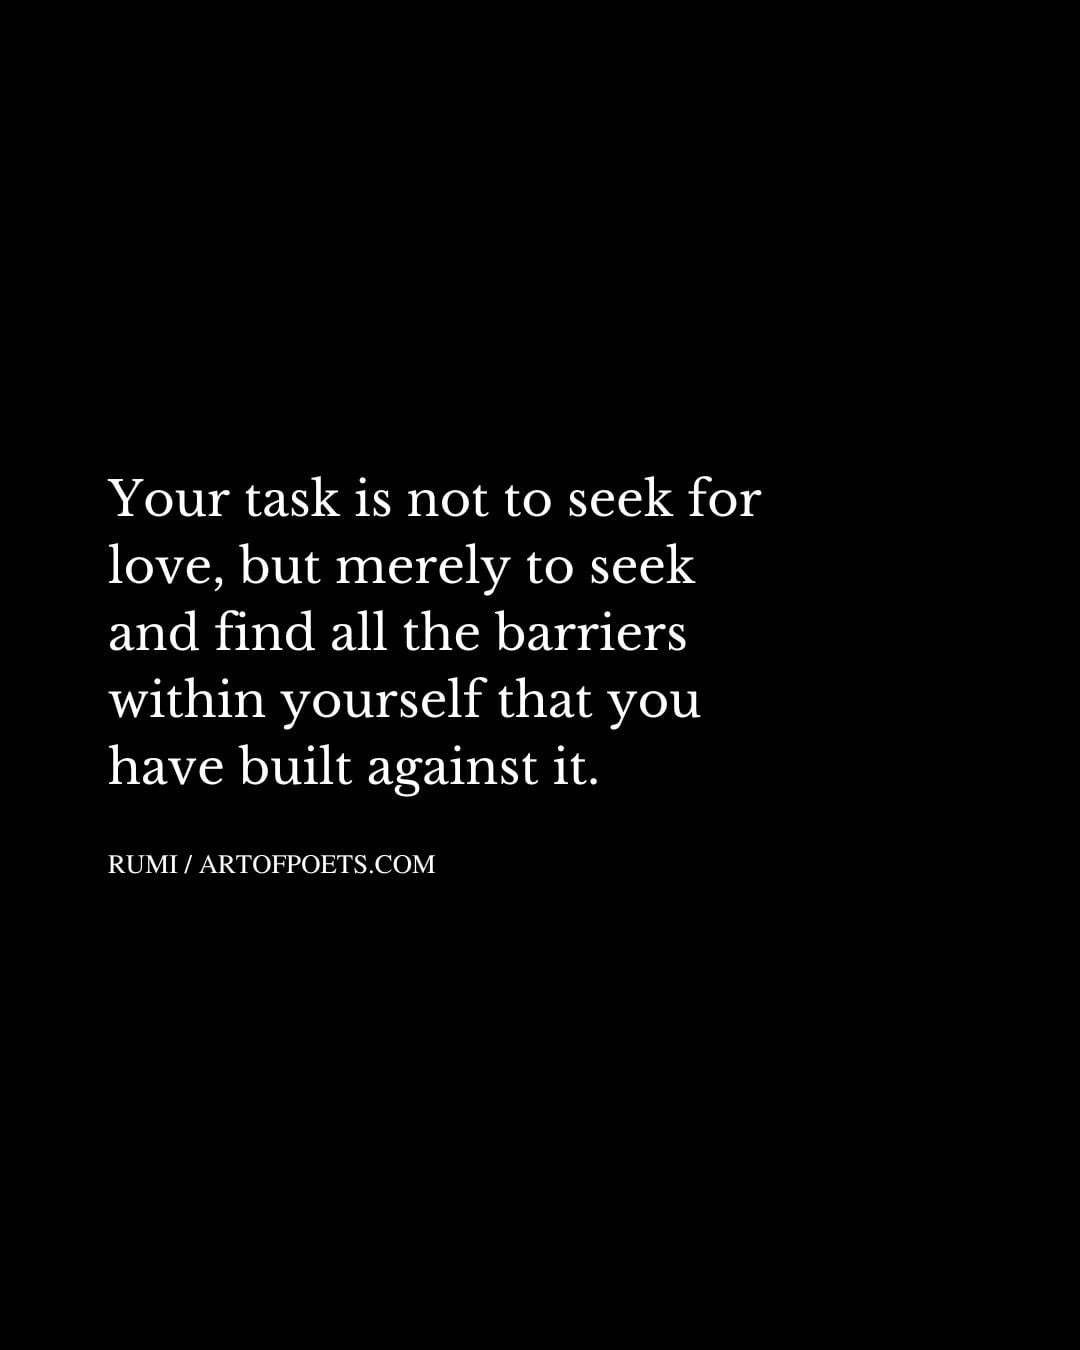 Your task is not to seek for love but merely to seek and find all the barriers within yourself that you have built against it